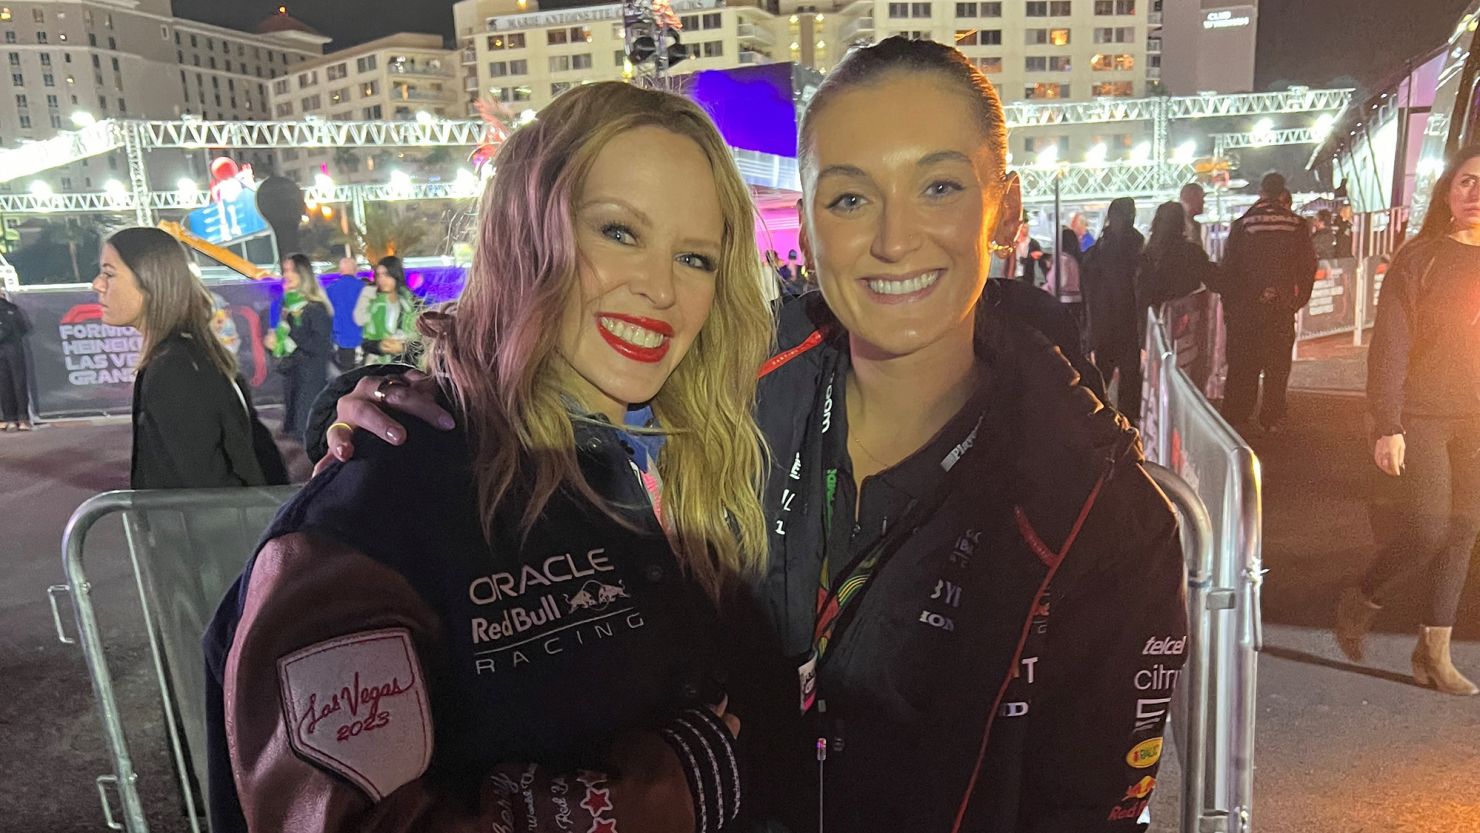 Red Bull's Jodie Porter, posing with Kylie Minogue, is responsible for guiding VIPs around the grid ahead of F1 races.